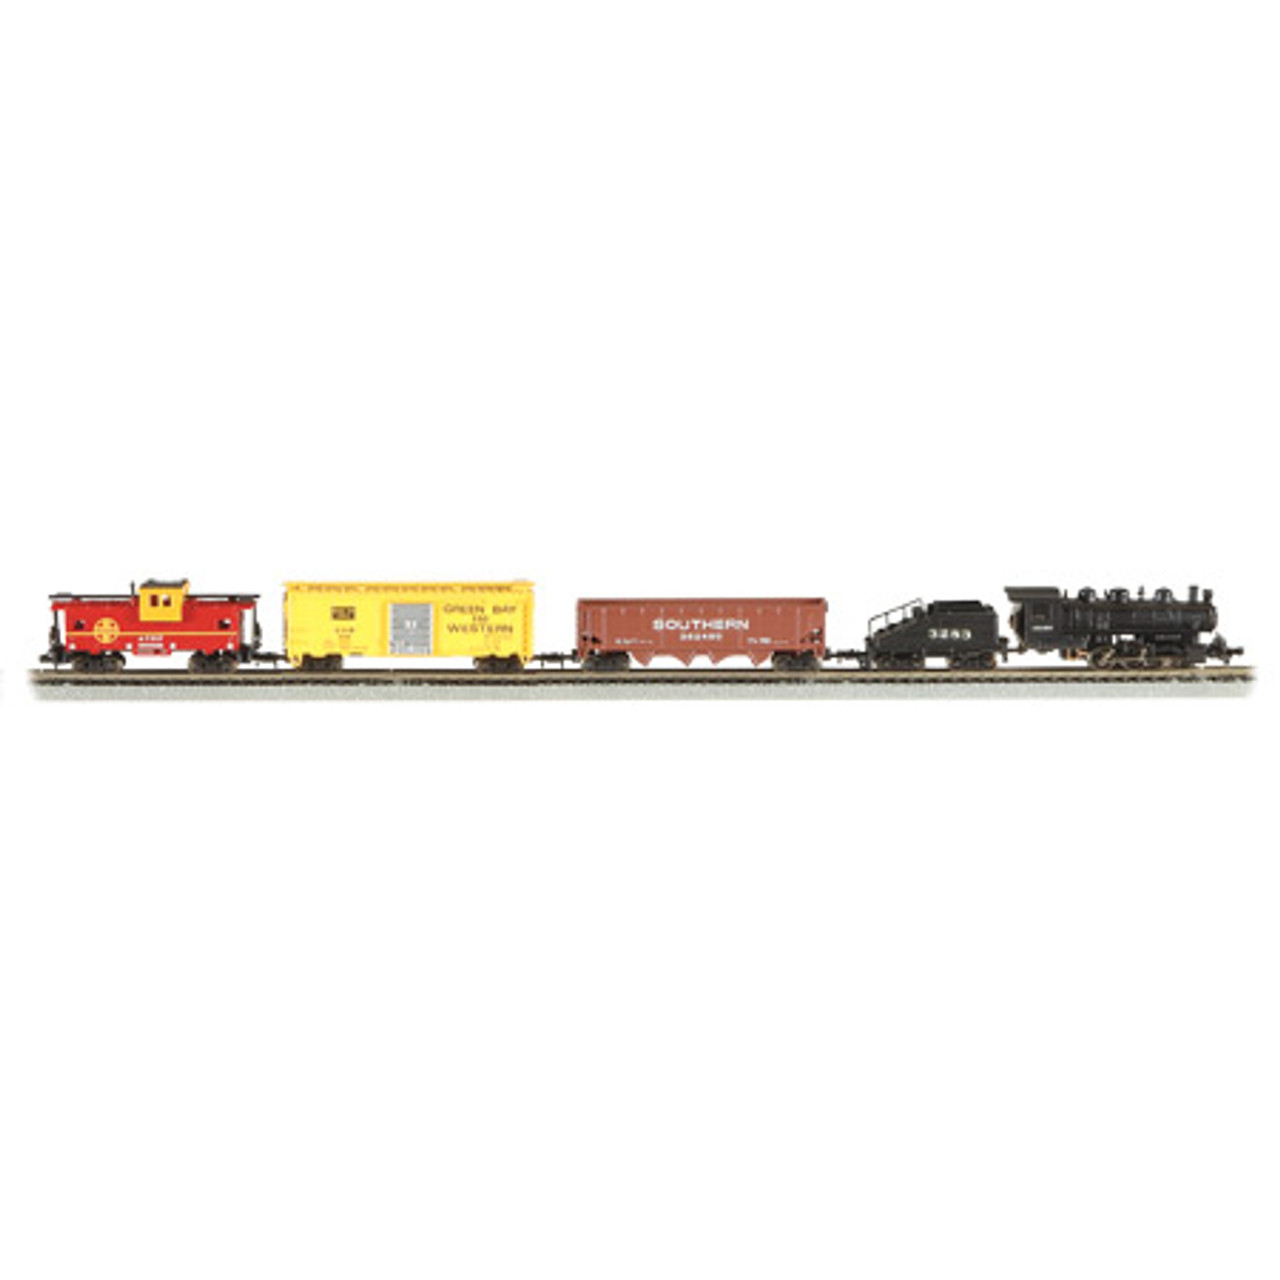 Bachmann Yard Boss Ready To Go Electric Train Set N Scale 24014 for sale online Multi-Color 